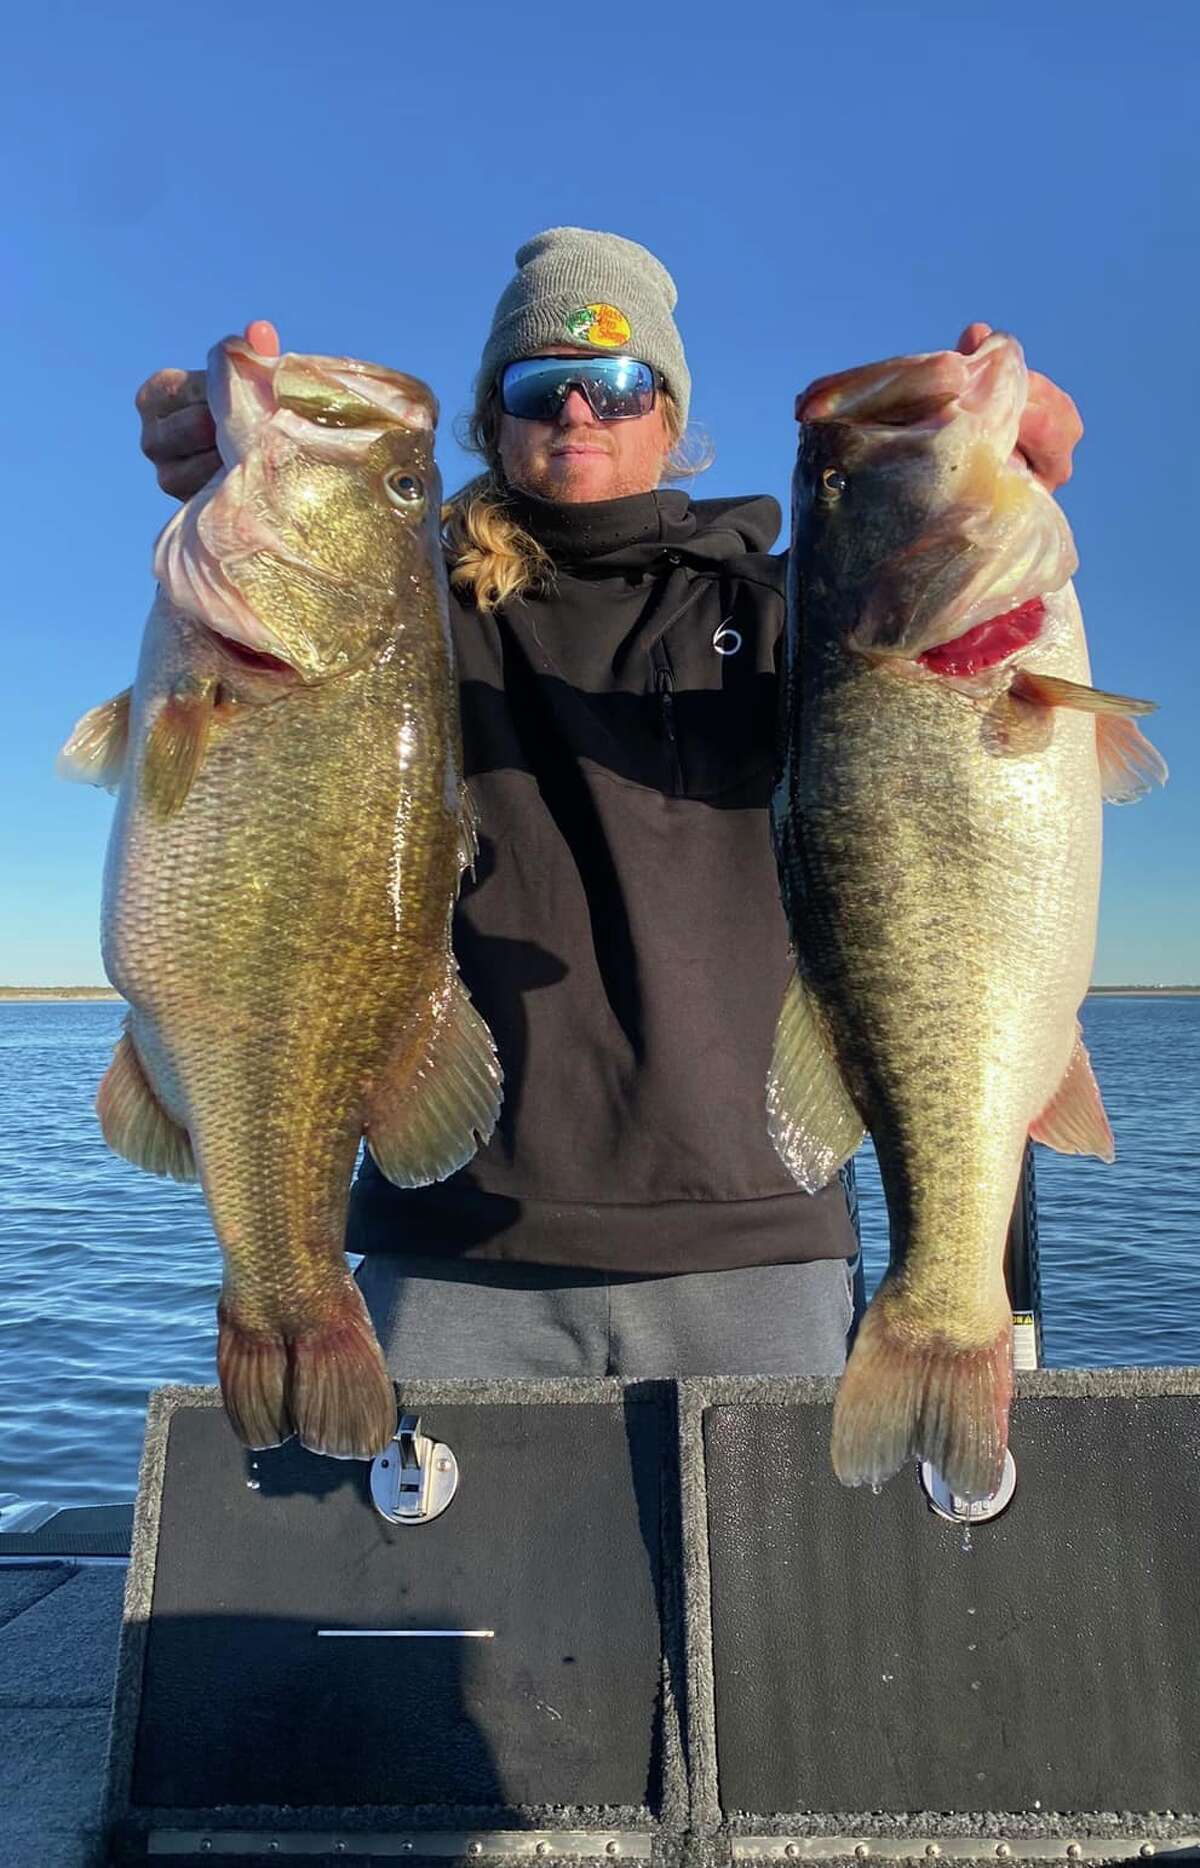 Oklahoma big bass hunter Josh Jones claims he caught 31 bass over eight pounds at O.H. Ivie in a single day in mid-December, including two 13 pounders, four other double digits, 11 over nine pounds and 14 over eight pounds. The heaviest five added up to 61.37 pounds. Jones calls it the heaviest five-fish catch from a public lake ever recorded cast-to-catch on video. 